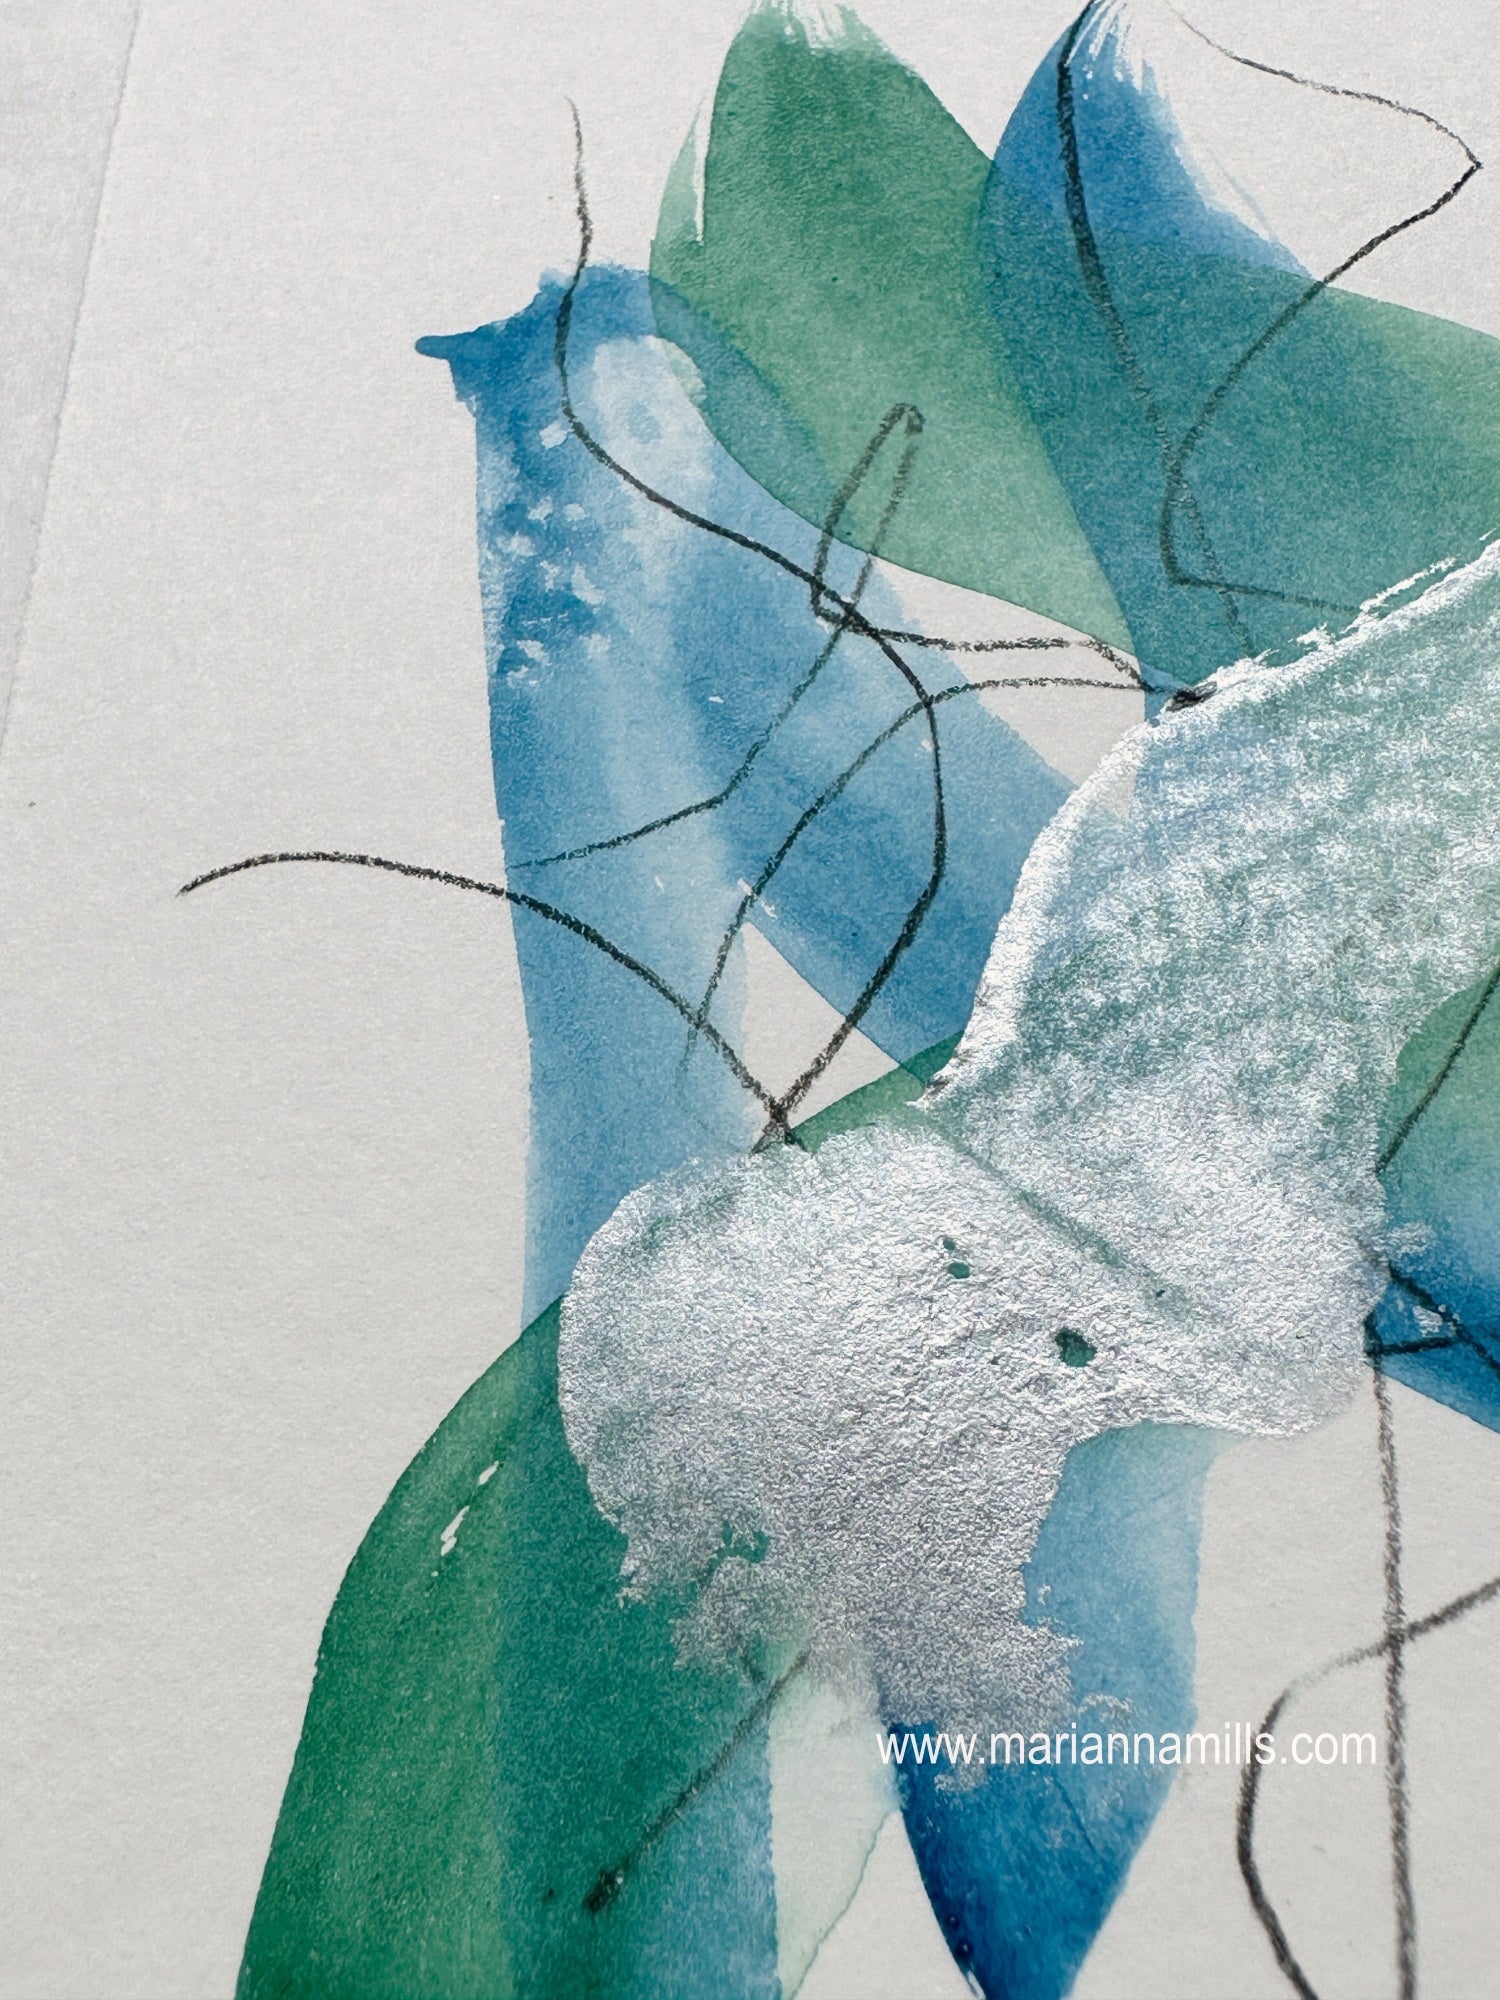 Dove Vol. 4 4"x6" by Marianna Mills. mixed media abstract painting. watercolor, acrylic. blue and green shades